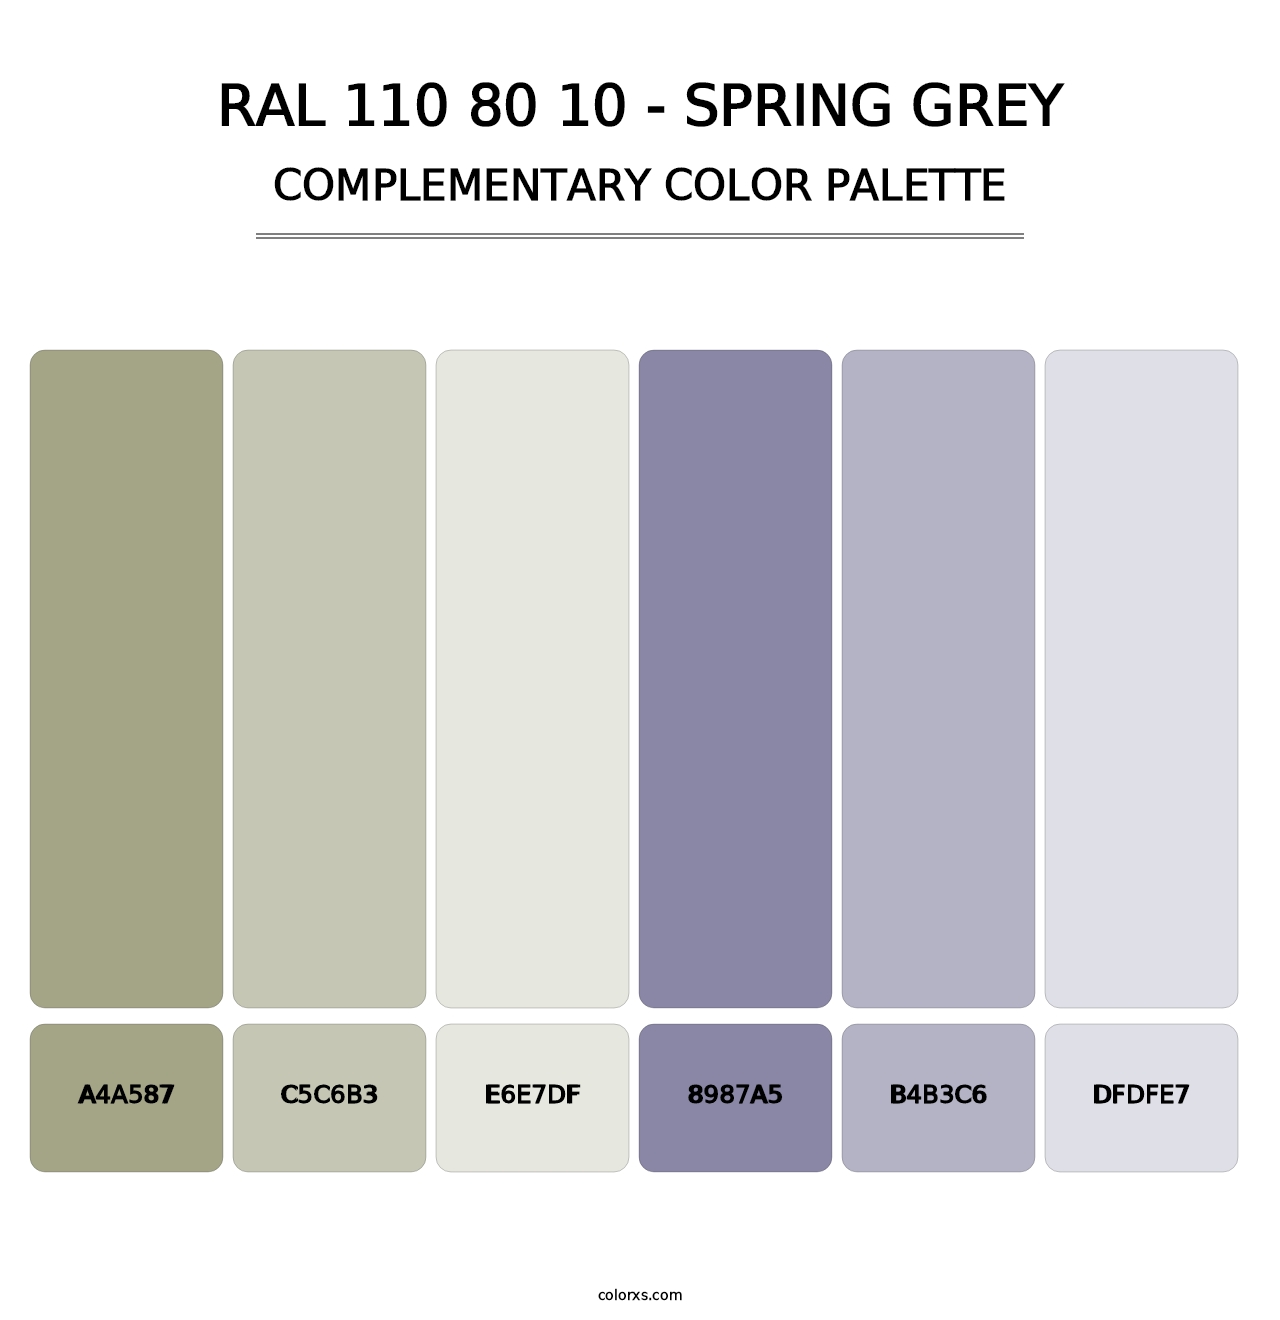 RAL 110 80 10 - Spring Grey - Complementary Color Palette